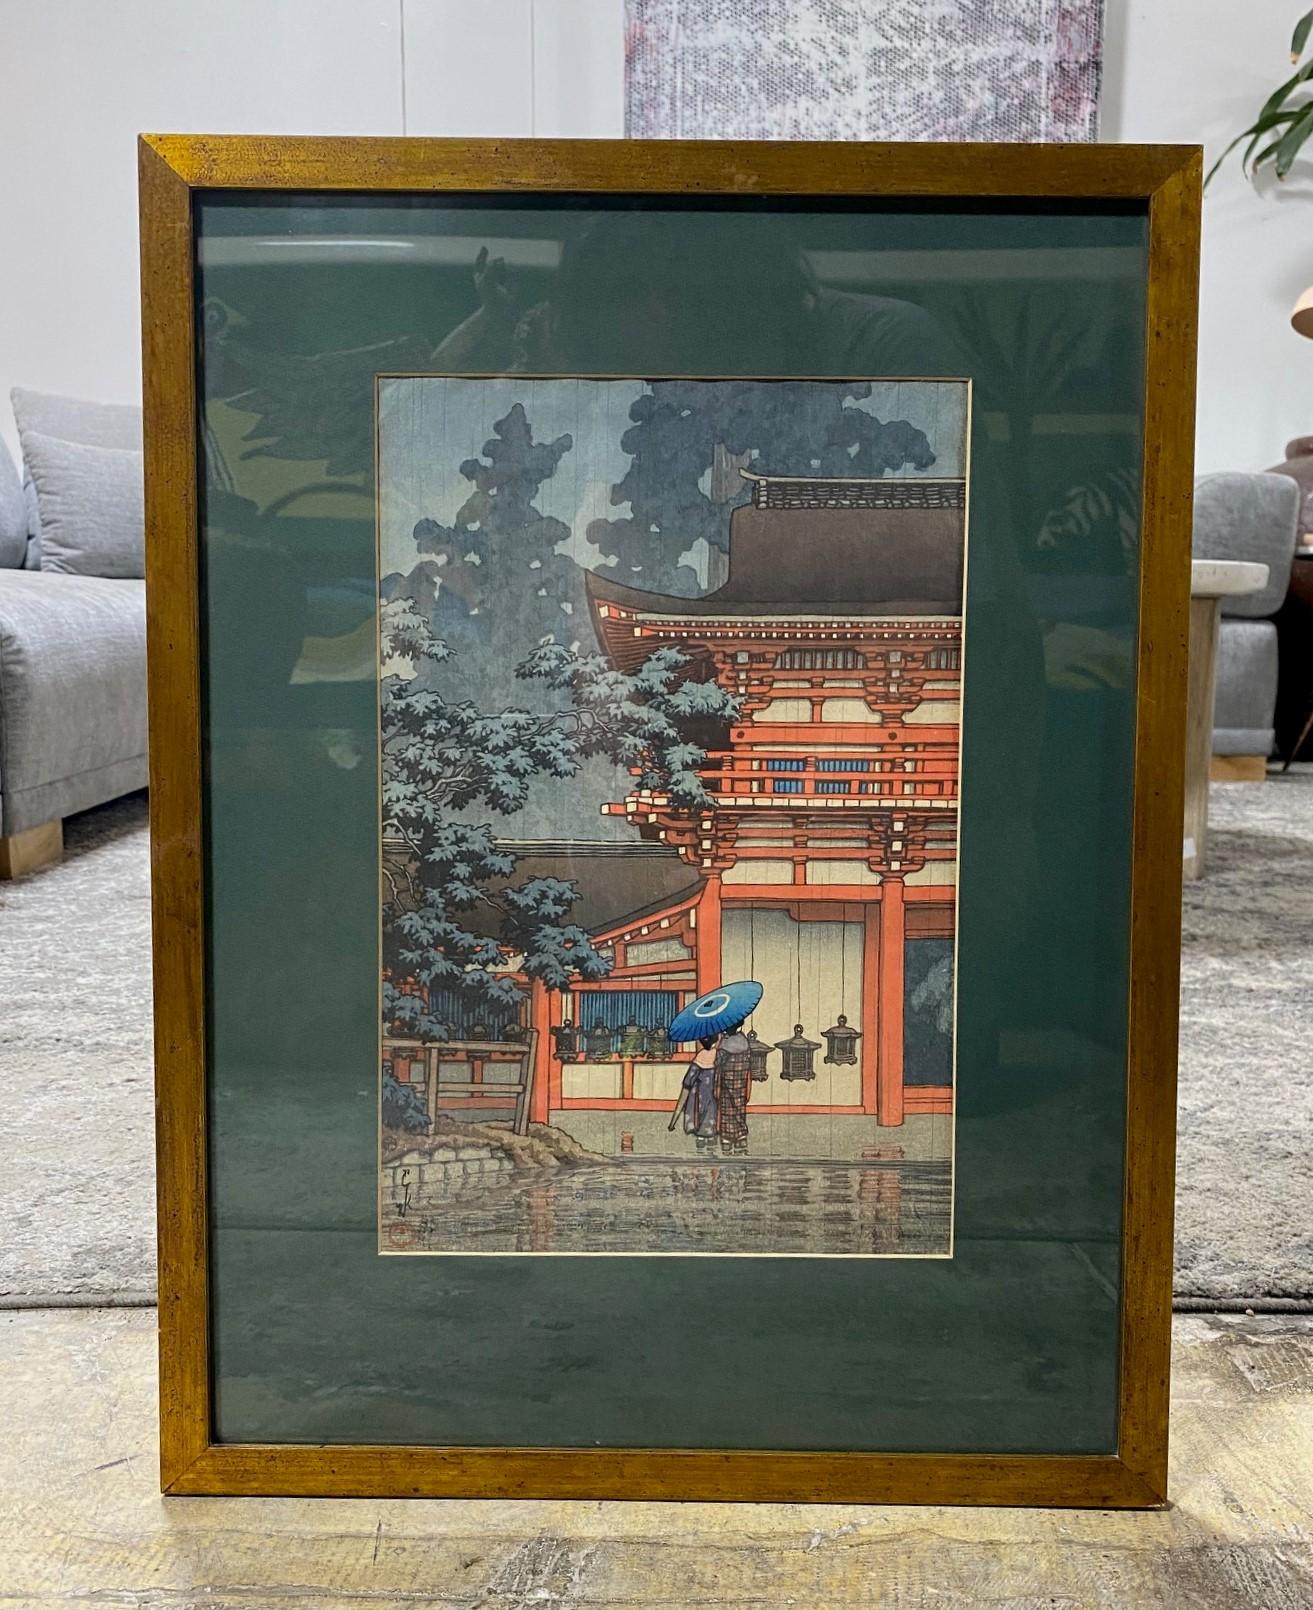 A beautiful and richly colored oban-sized woodblock print by famed Japanese artist Kawase Hasui. This print is titled 